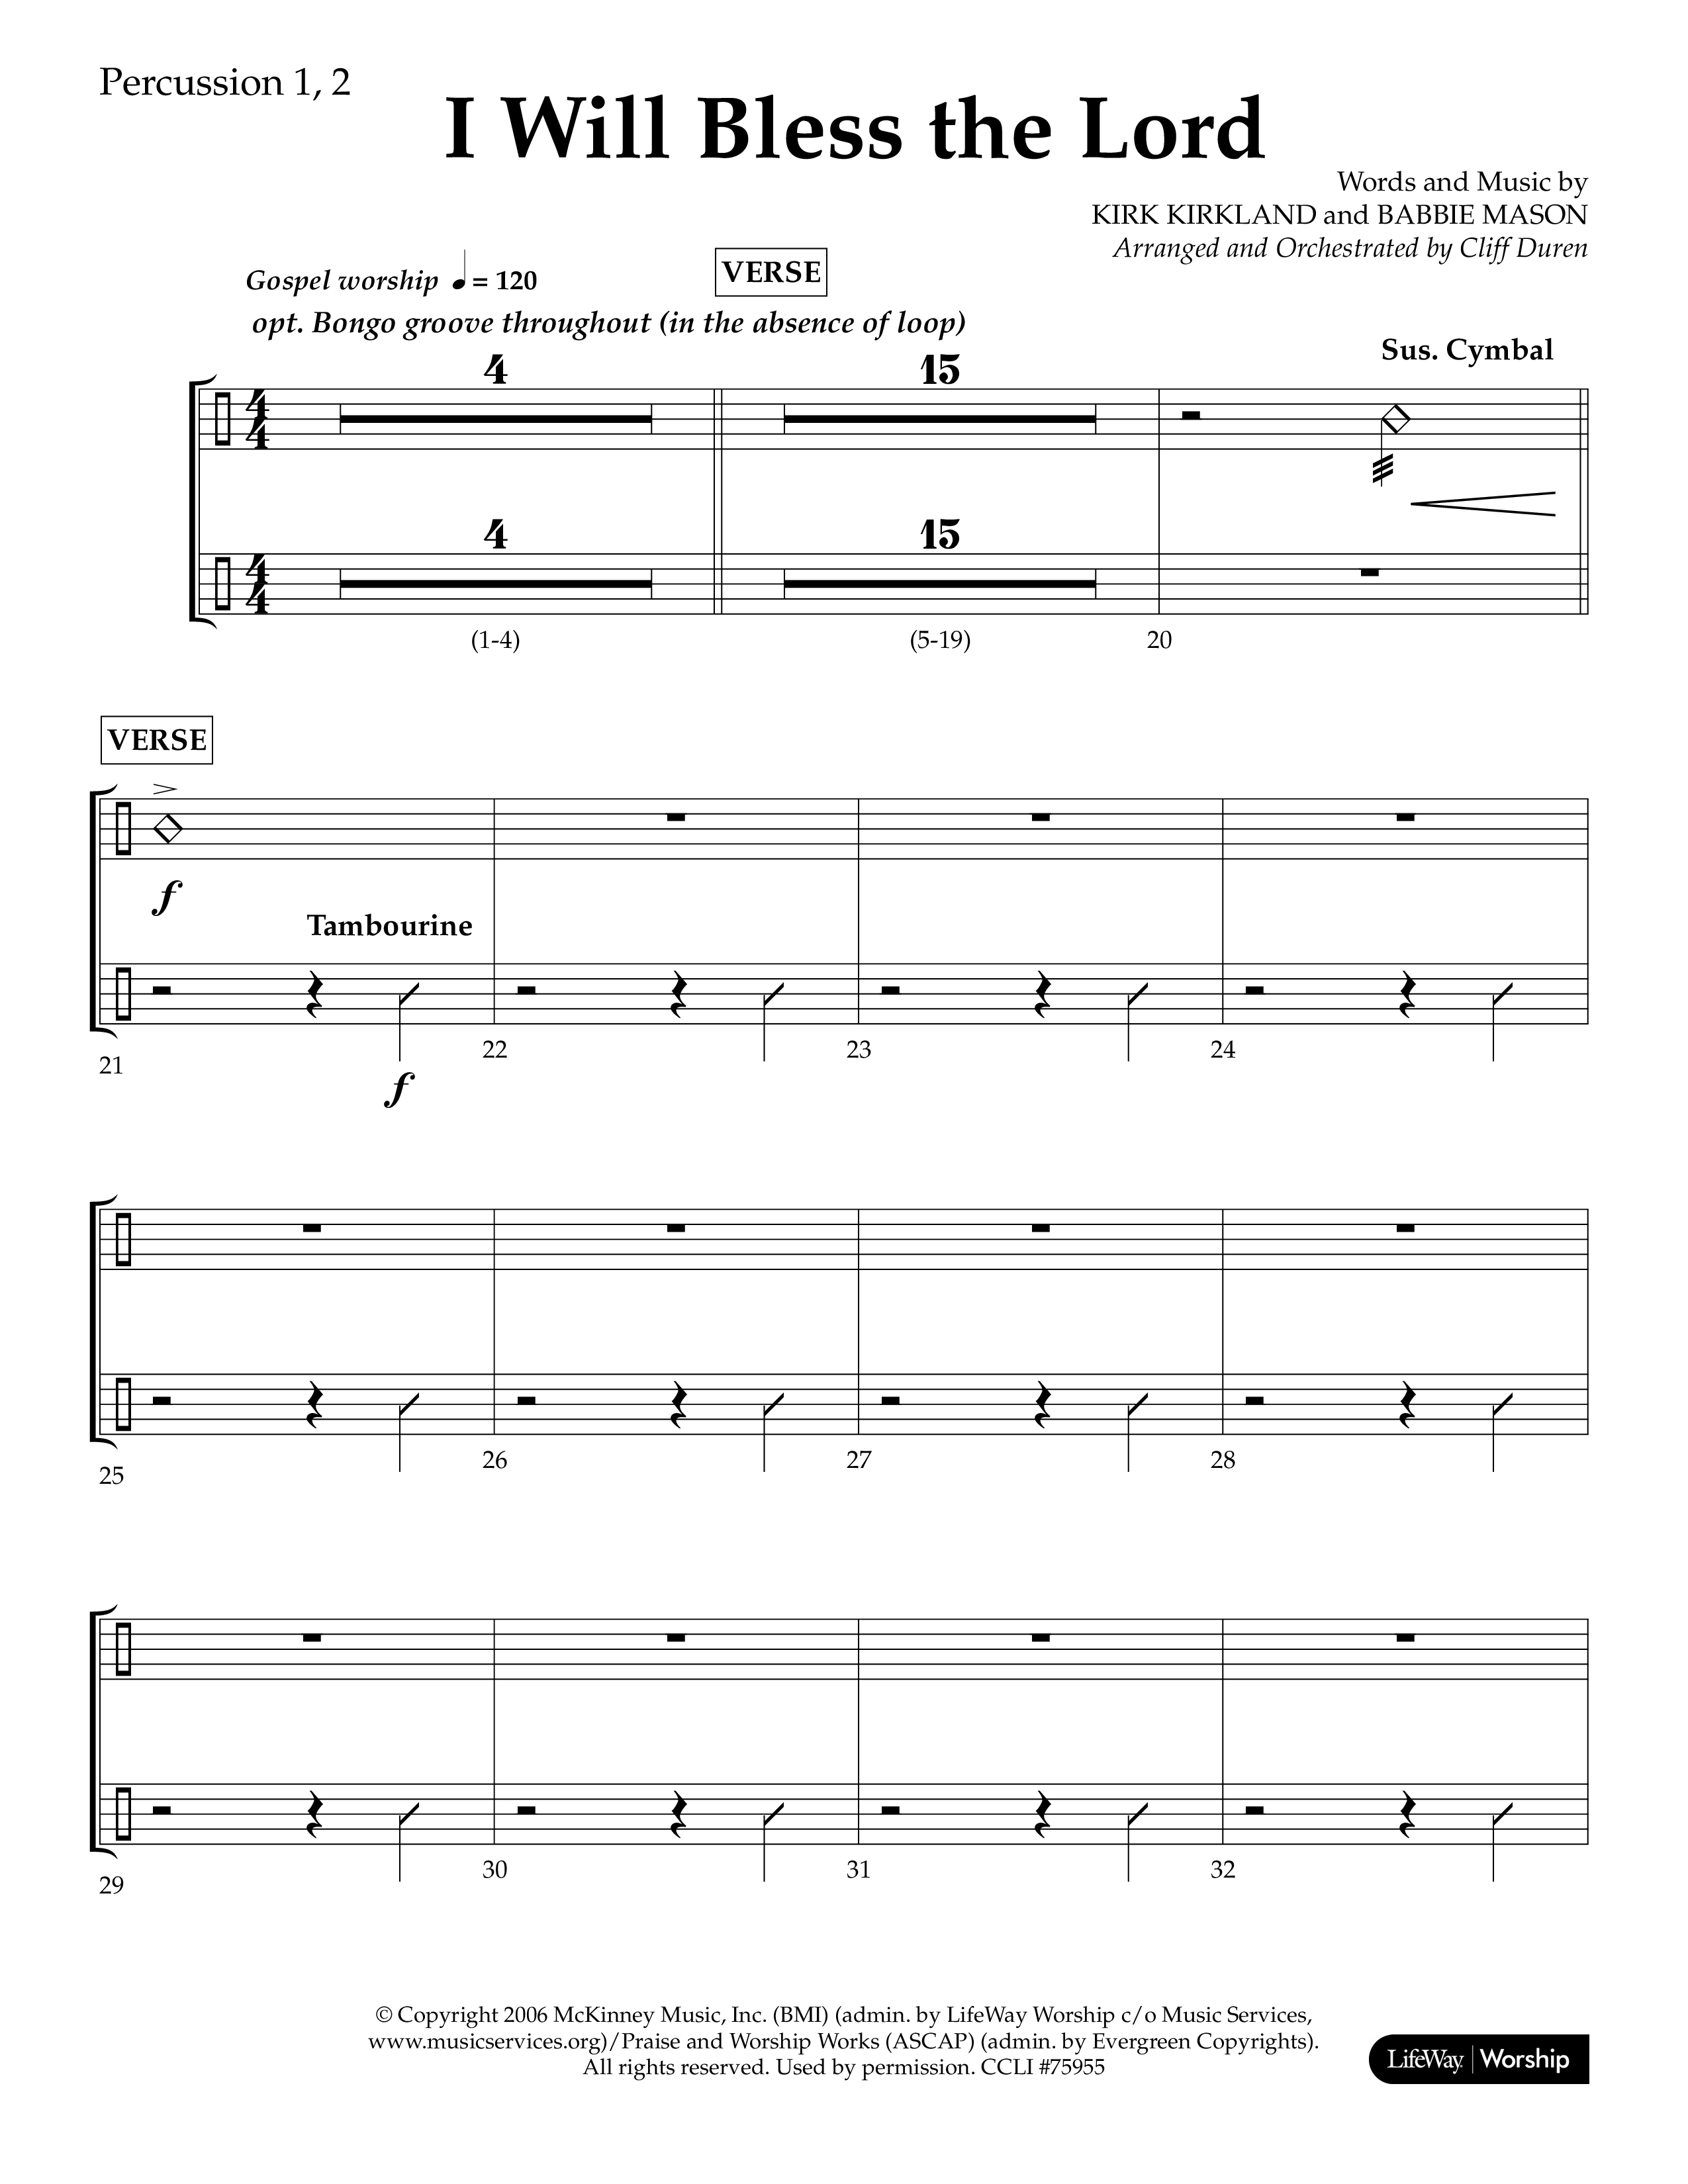 I Will Bless The Lord (Choral Anthem SATB) Percussion 1/2 (Lifeway Worship / Arr. Cliff Duren)